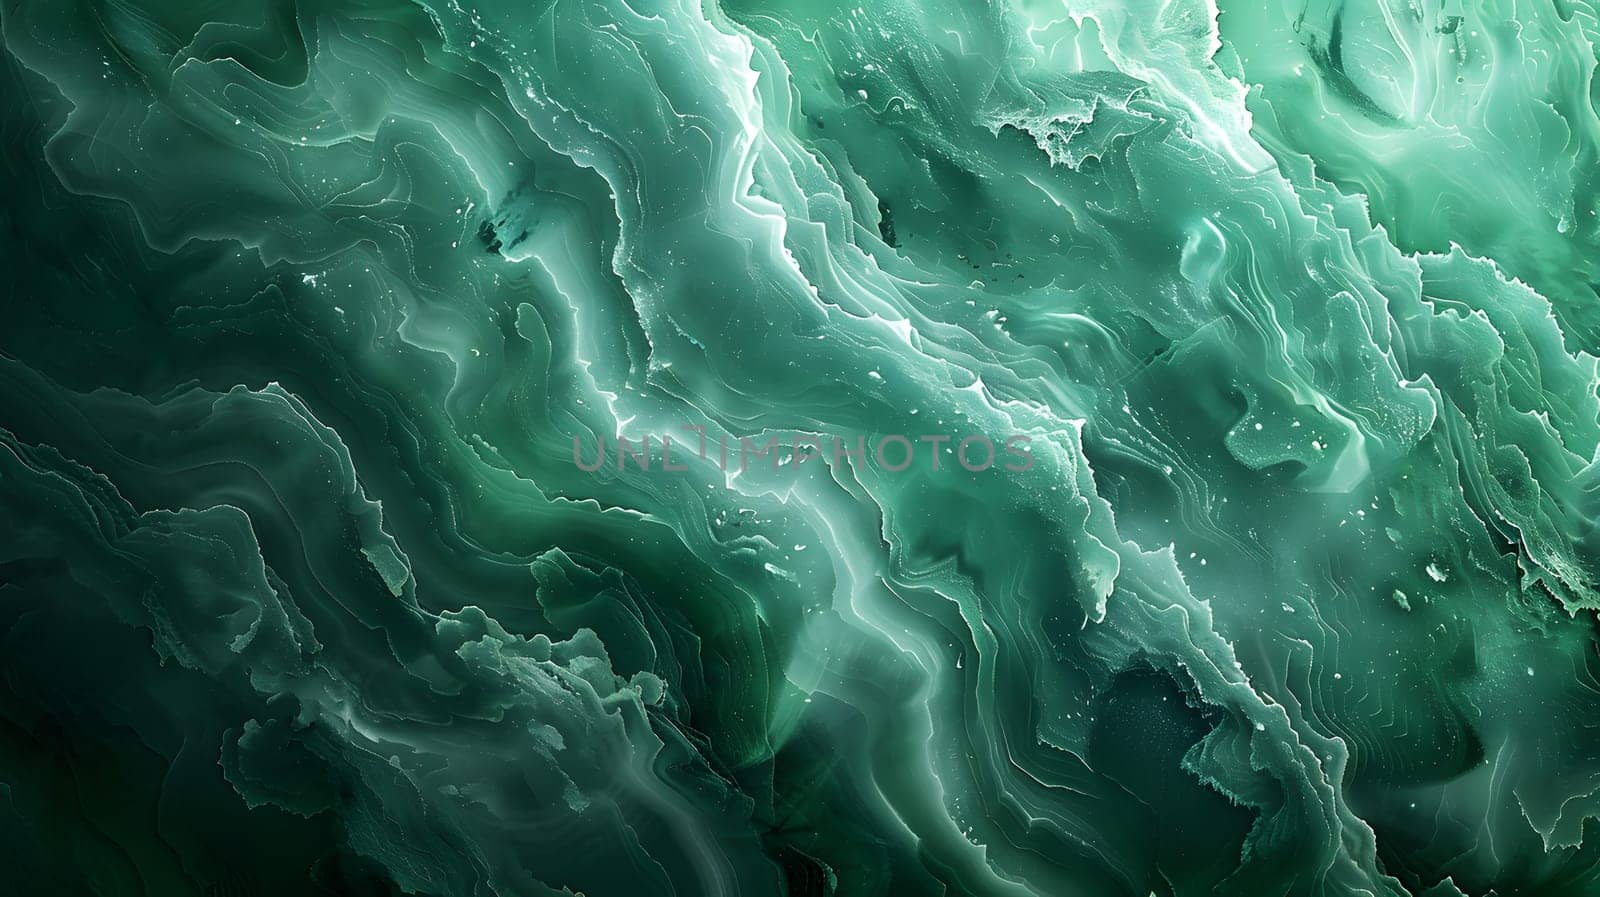 Closeup of green marble with fluid pattern resembling wind waves by Nadtochiy